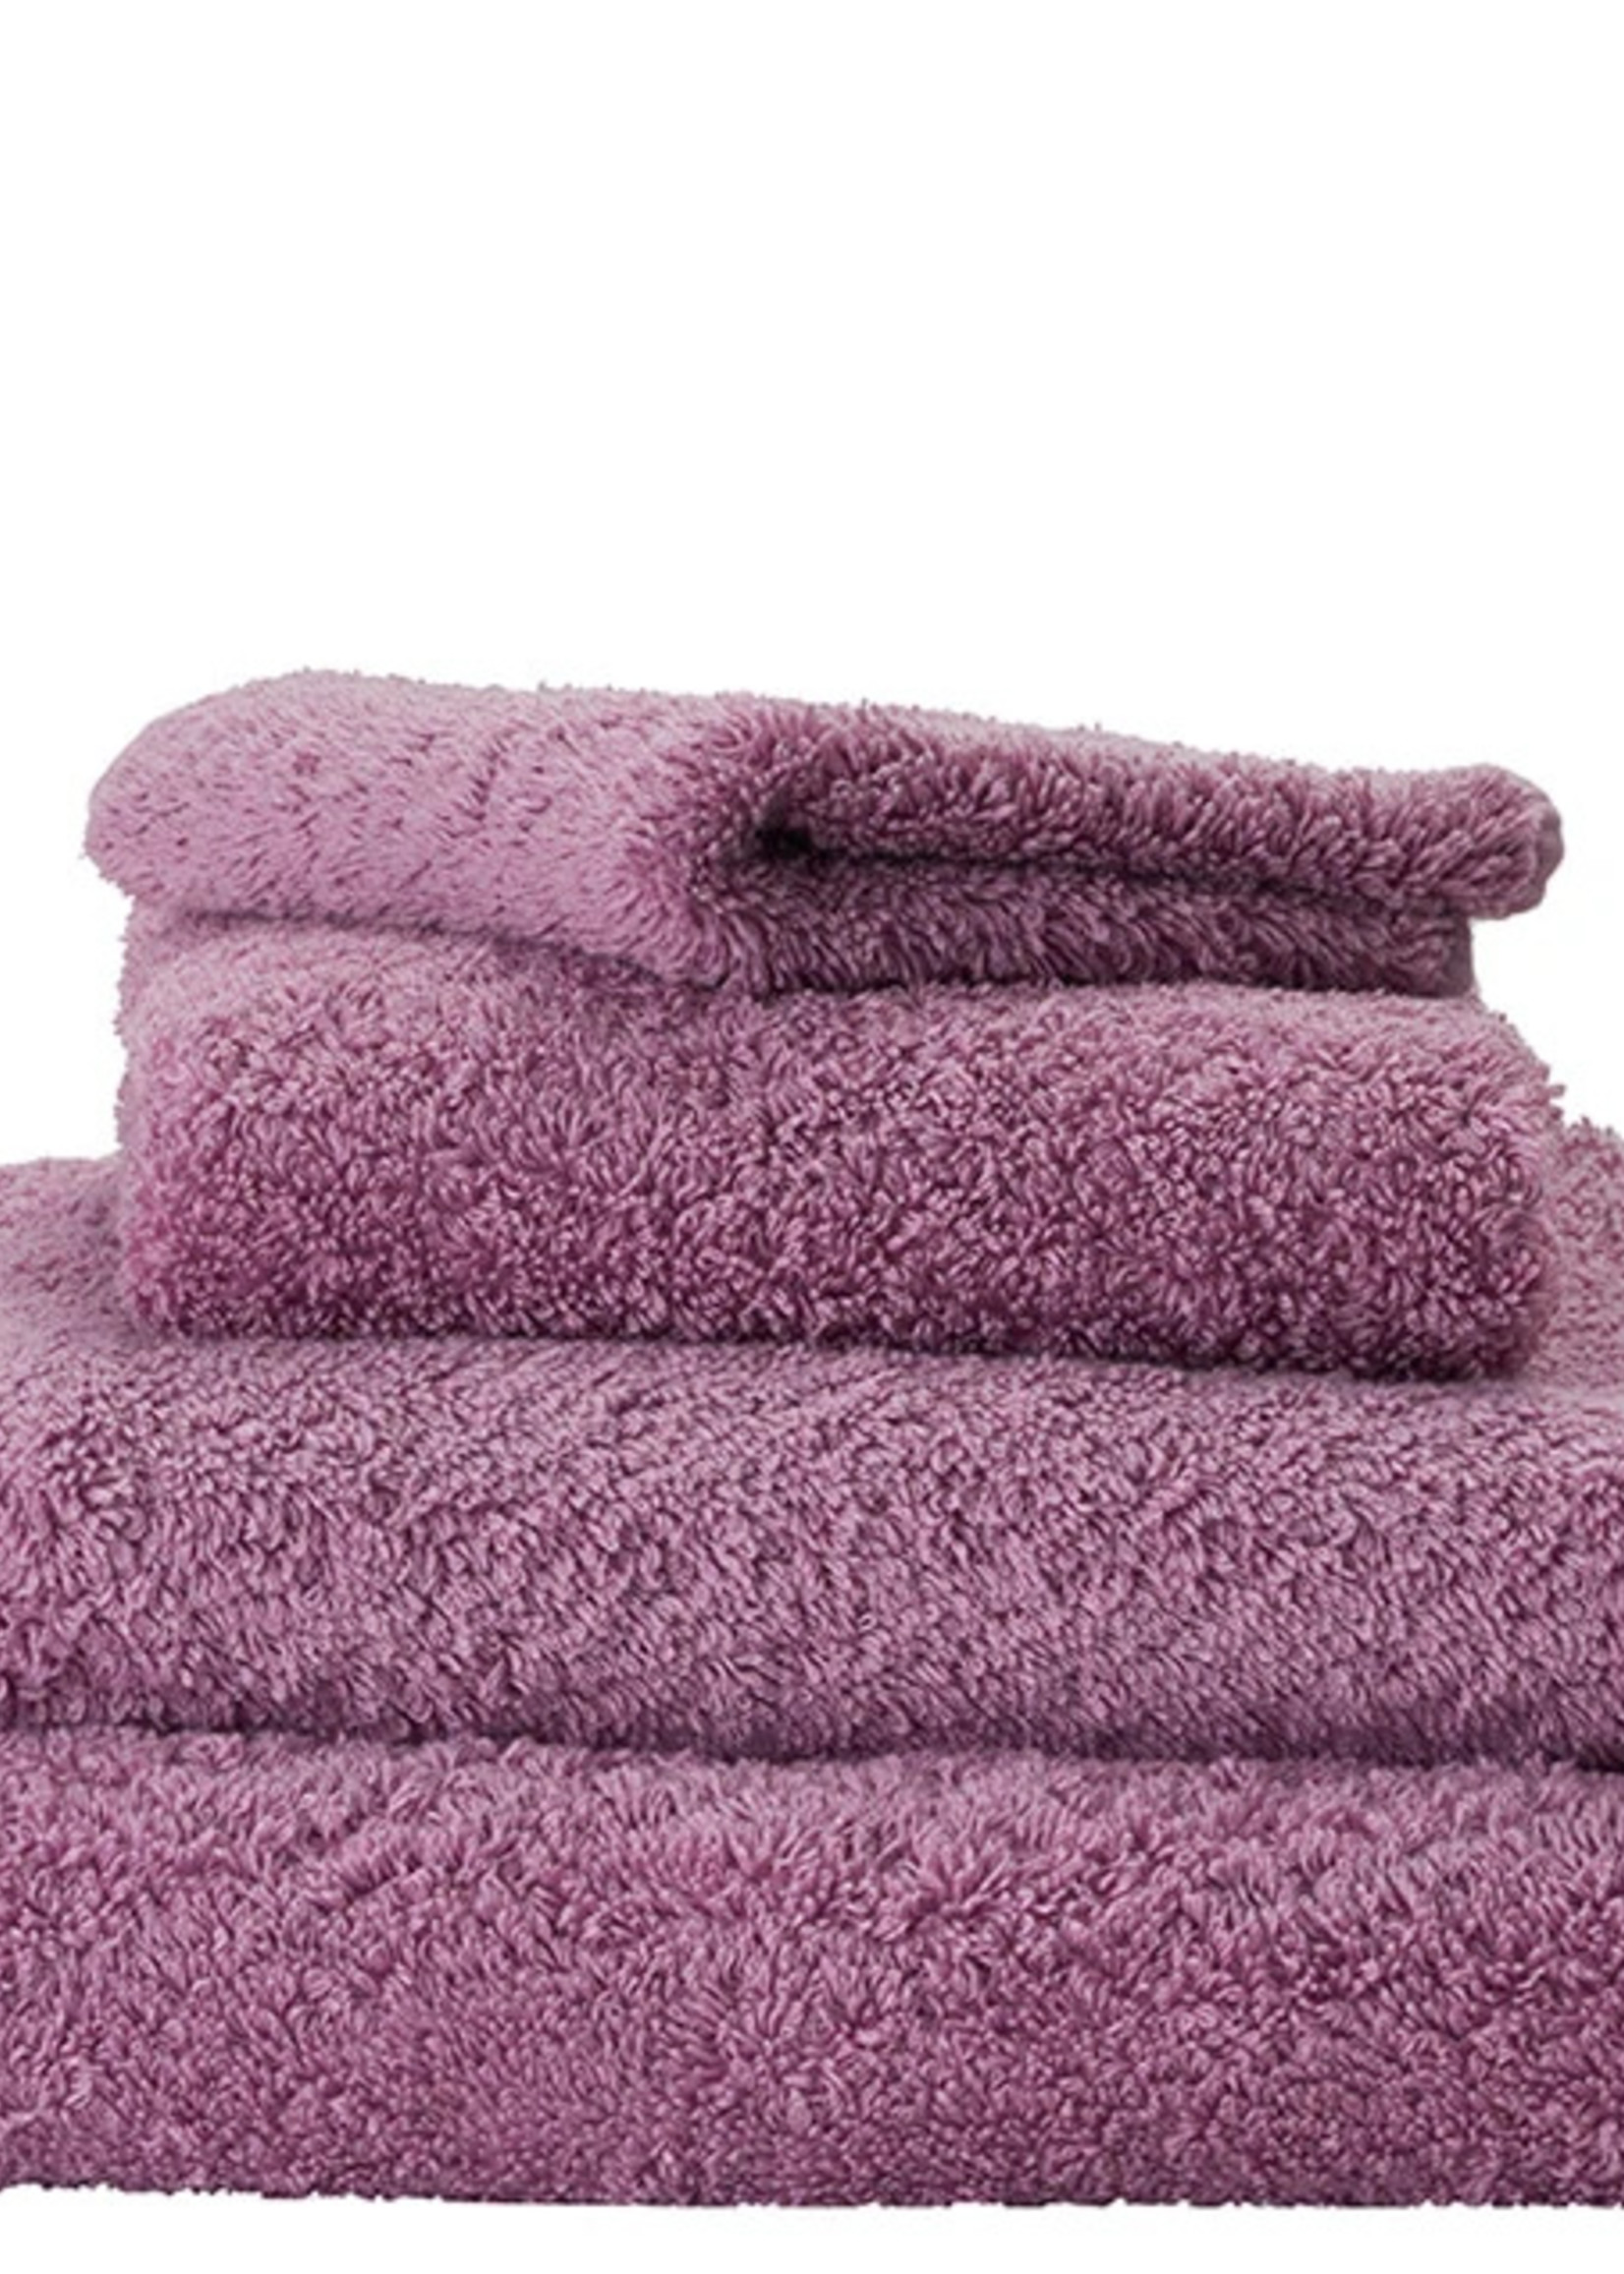 Abyss & Habidecor Super Pile Orchid Towels